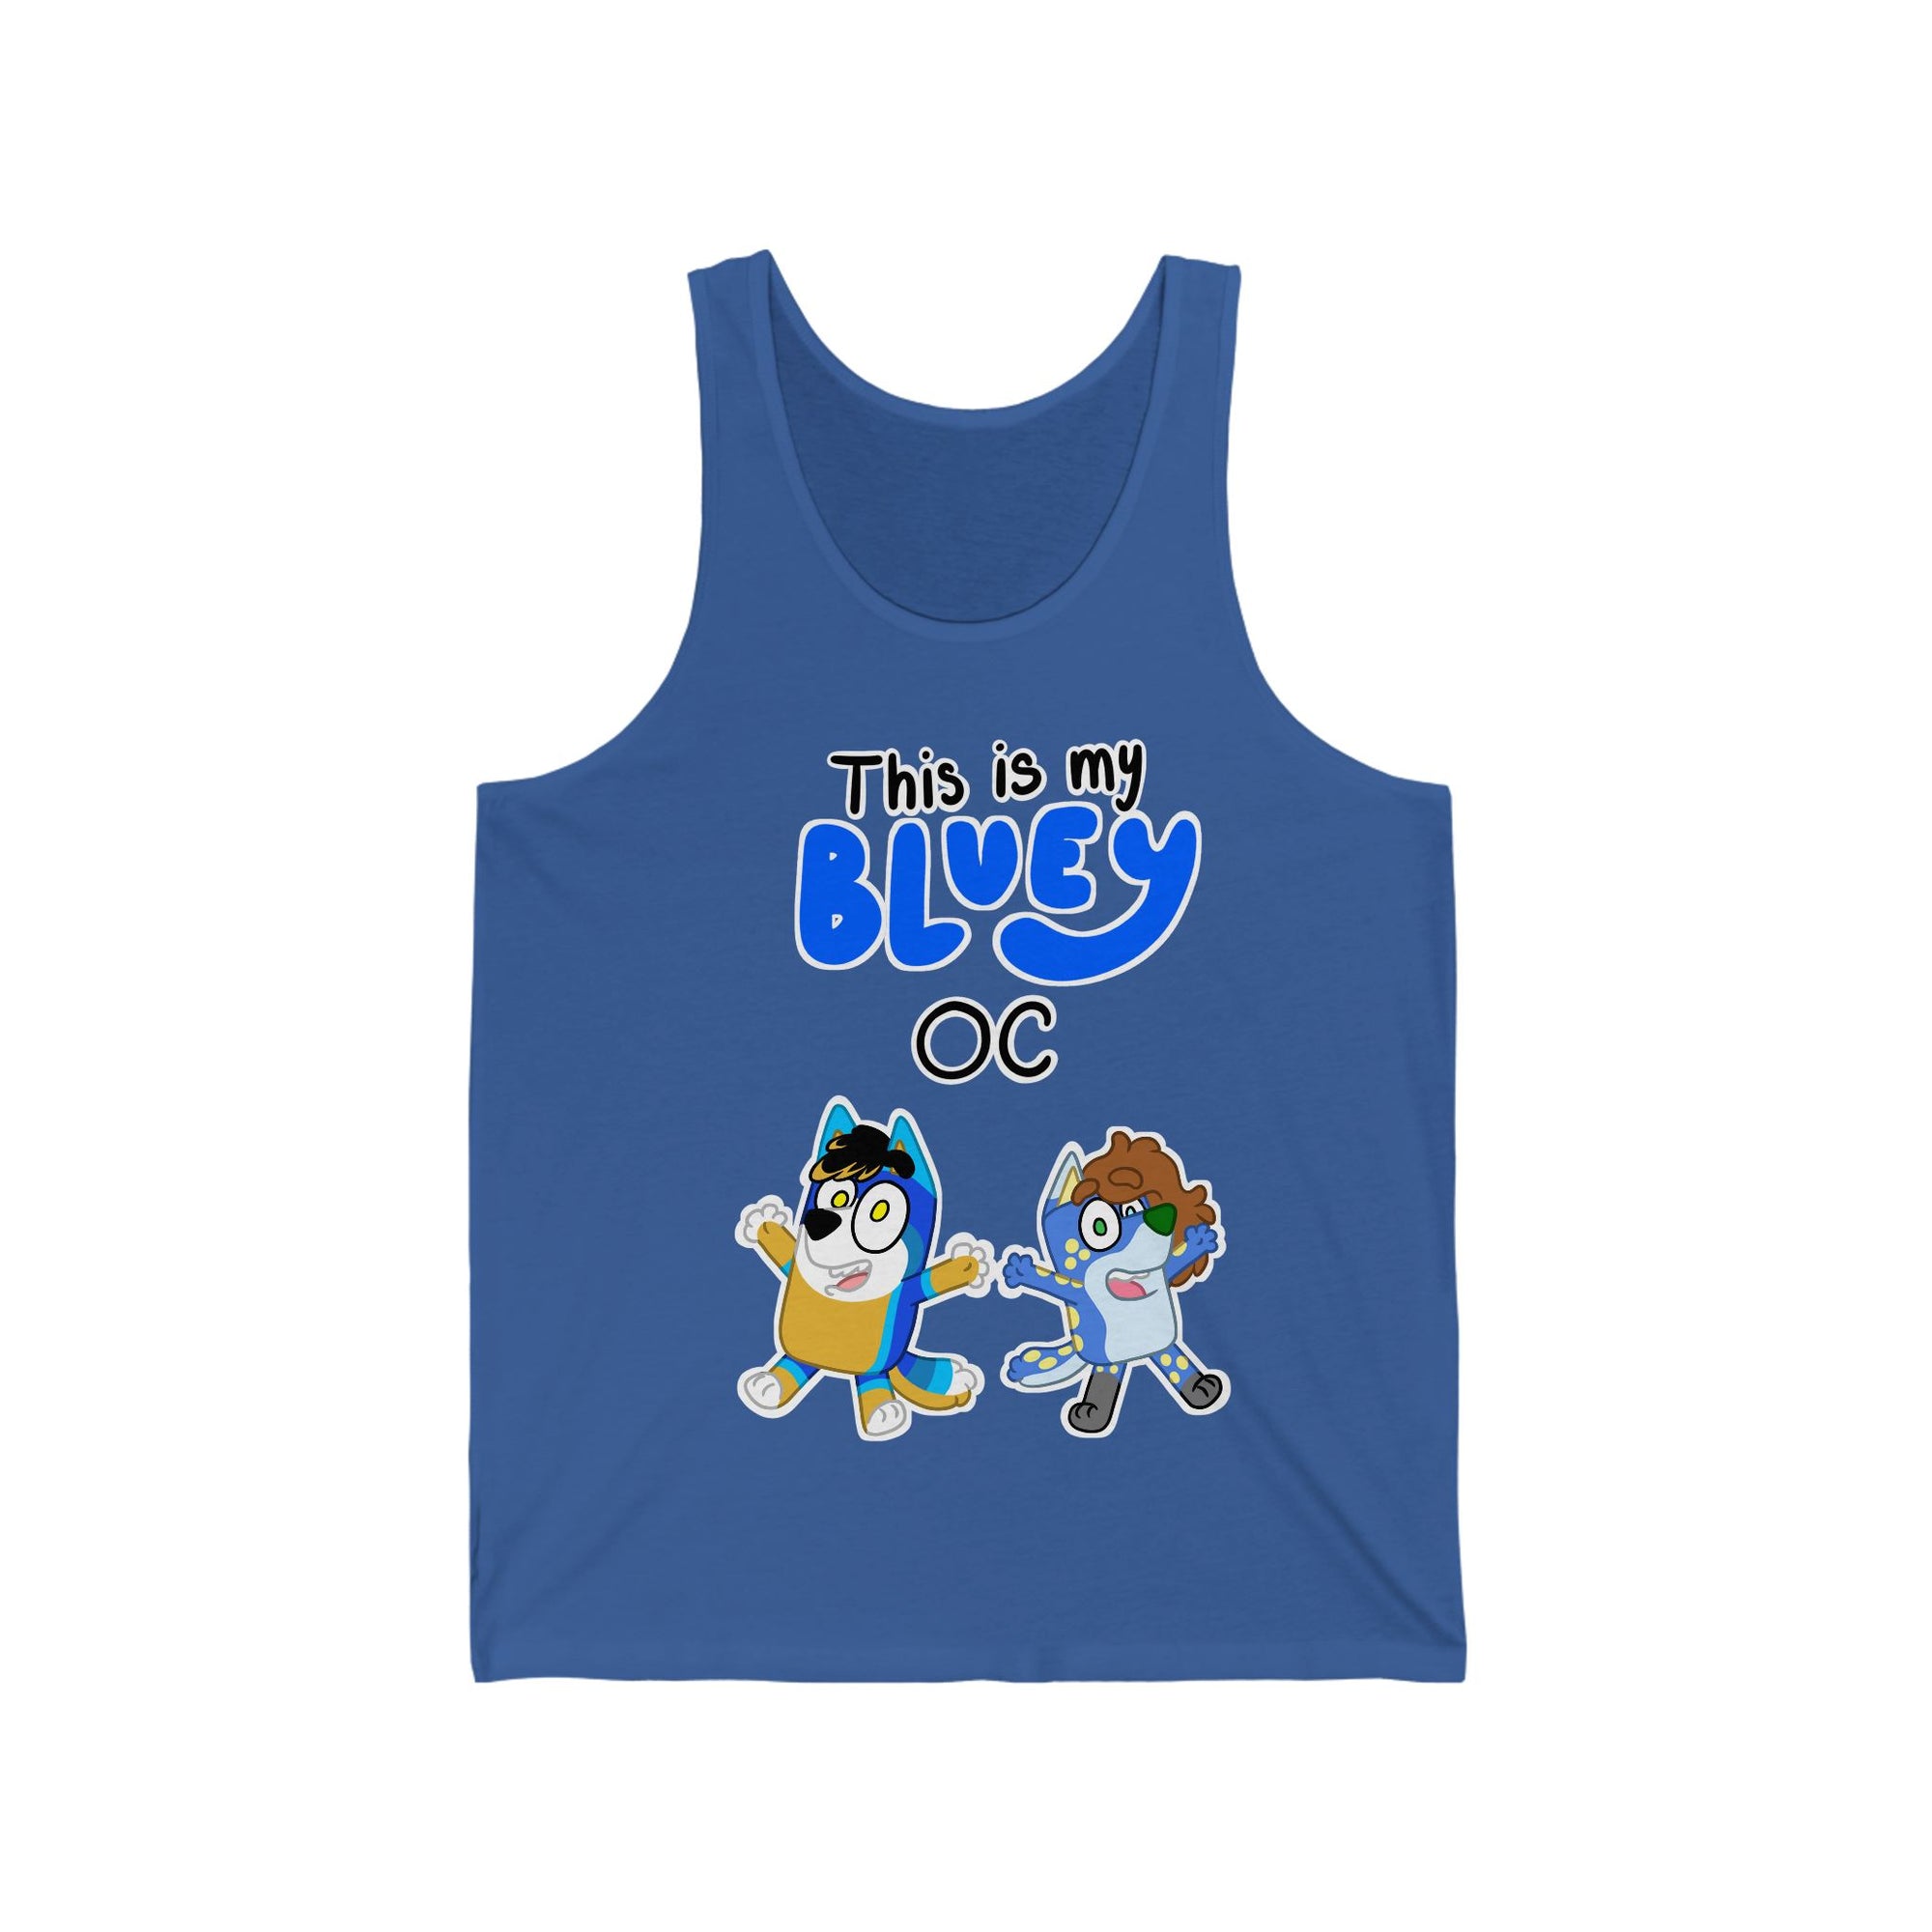 This is my Bluey OC - Tank Top Tank Top AFLT-Hund The Hound 